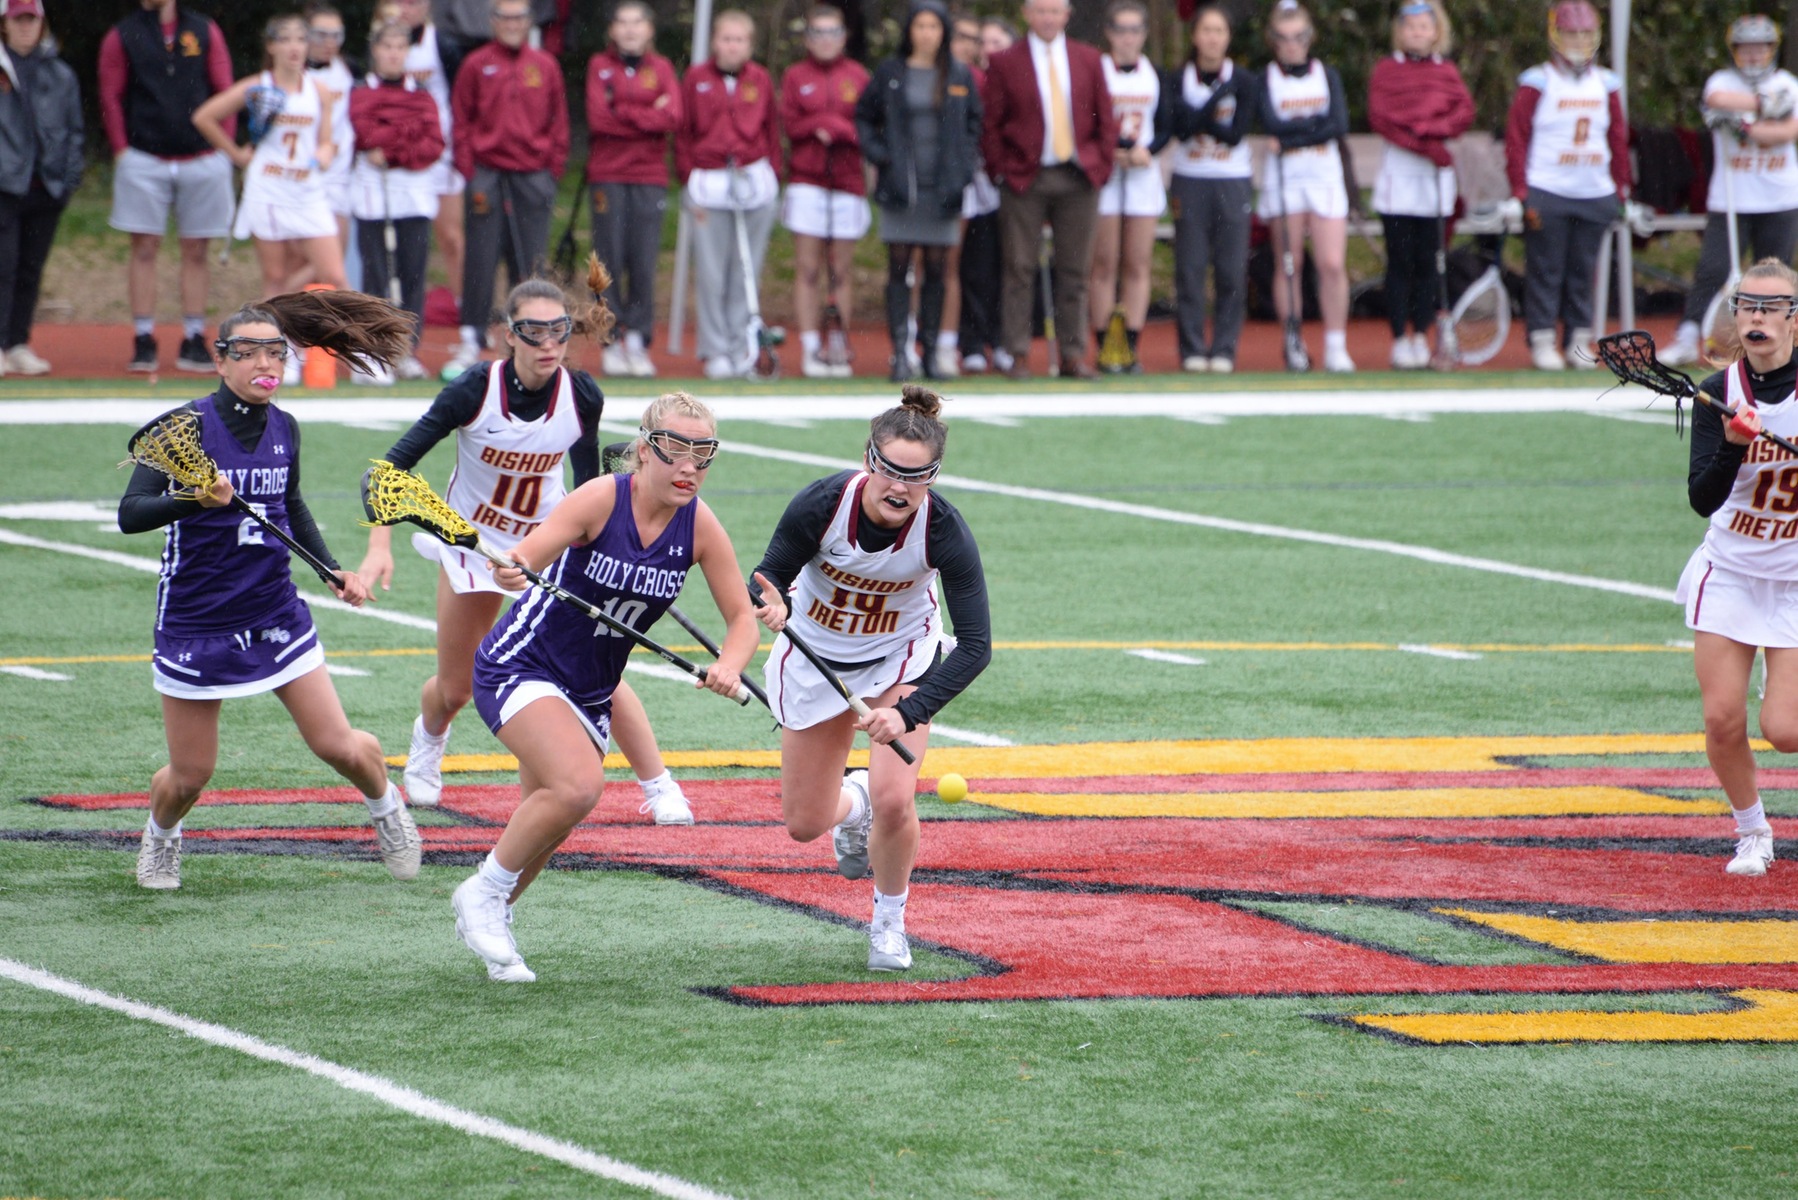 Both Bishop Ireton and Holy Cross advanced with Quarterfinal wins on Tuesday.